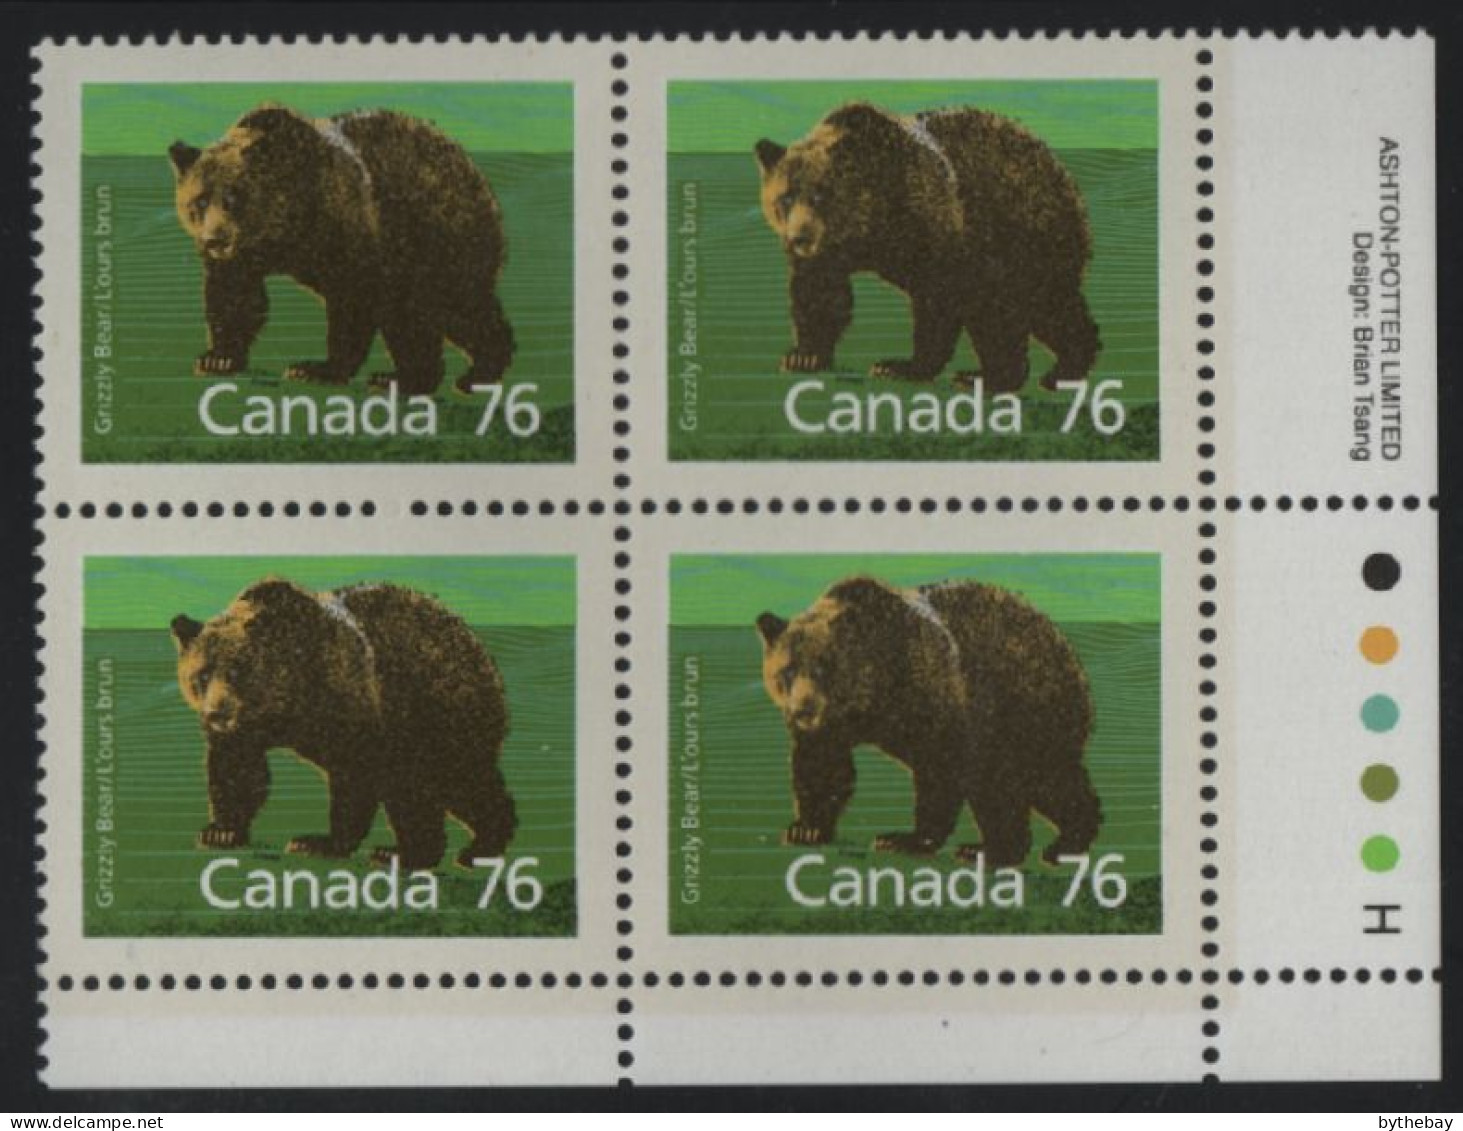 Canada 1988-92 MNH Sc 1178 76c Grizzly Bear LR Plate Block - Num. Planches & Inscriptions Marge